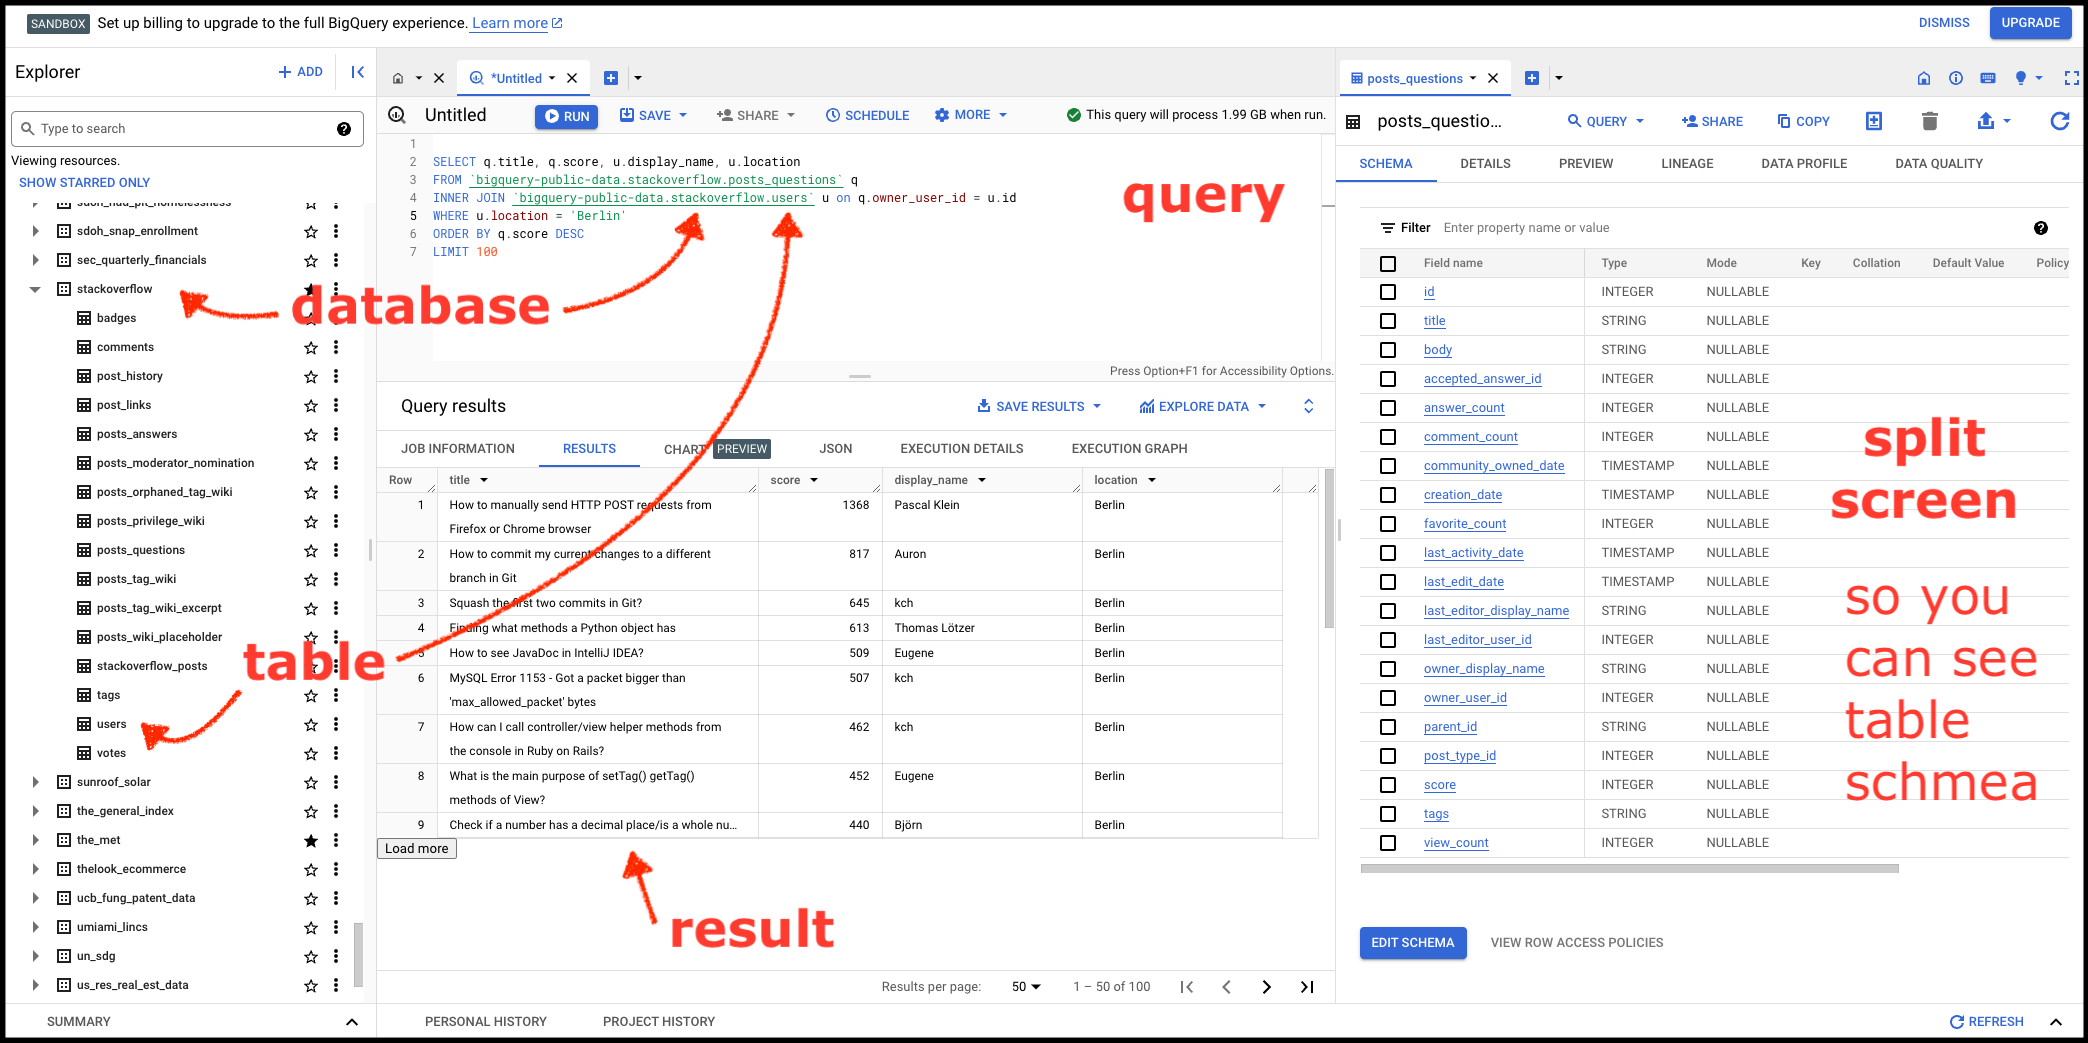 How to use BigQuery